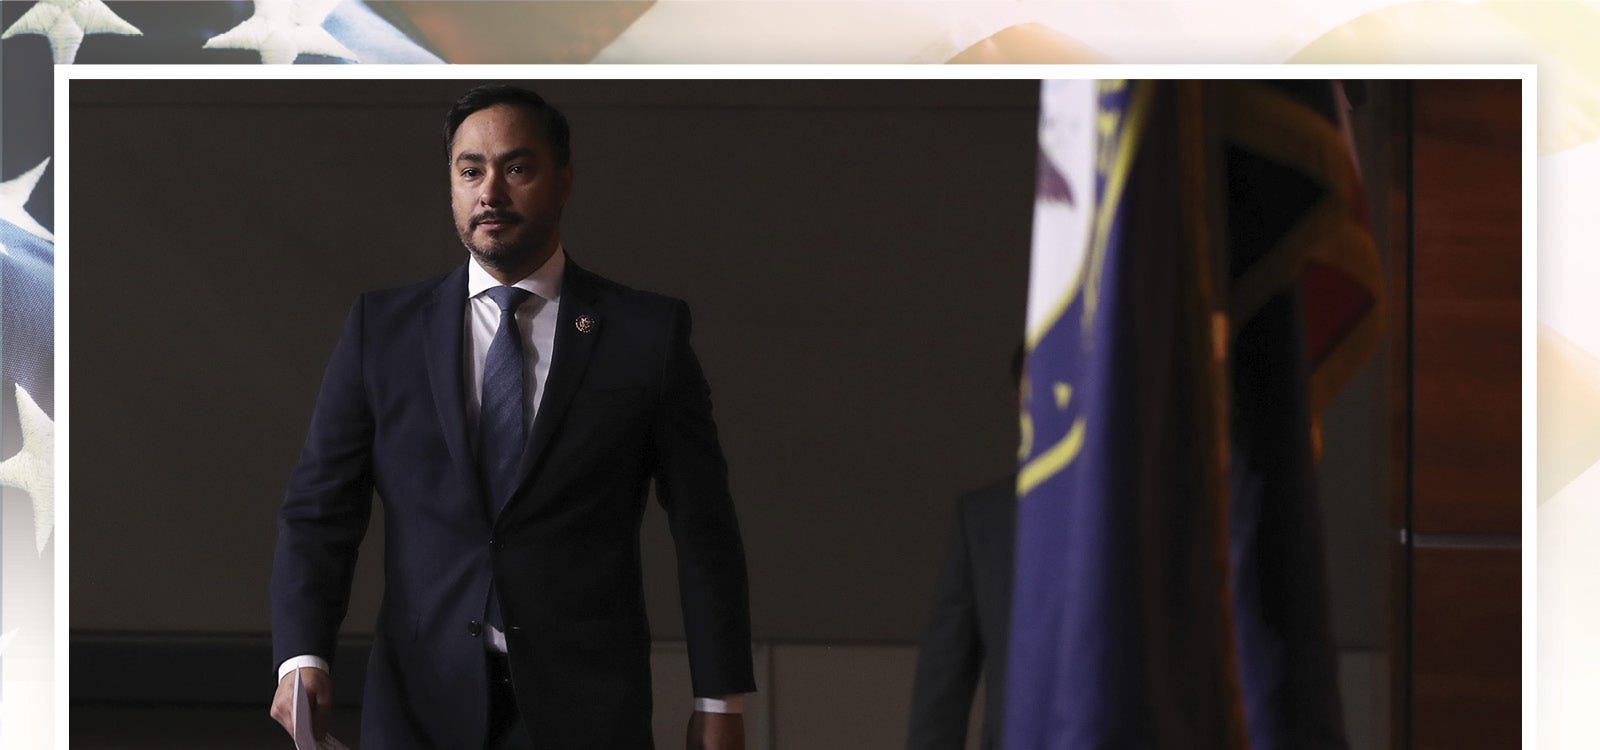 Congressional Hispanic Caucus chairman Rep. Joaquin Castro, D-TX, arrives for a news conference to discuss the Supreme Court case involving Deferred Action for Childhood Arrivals on Nov. 12, 2019.